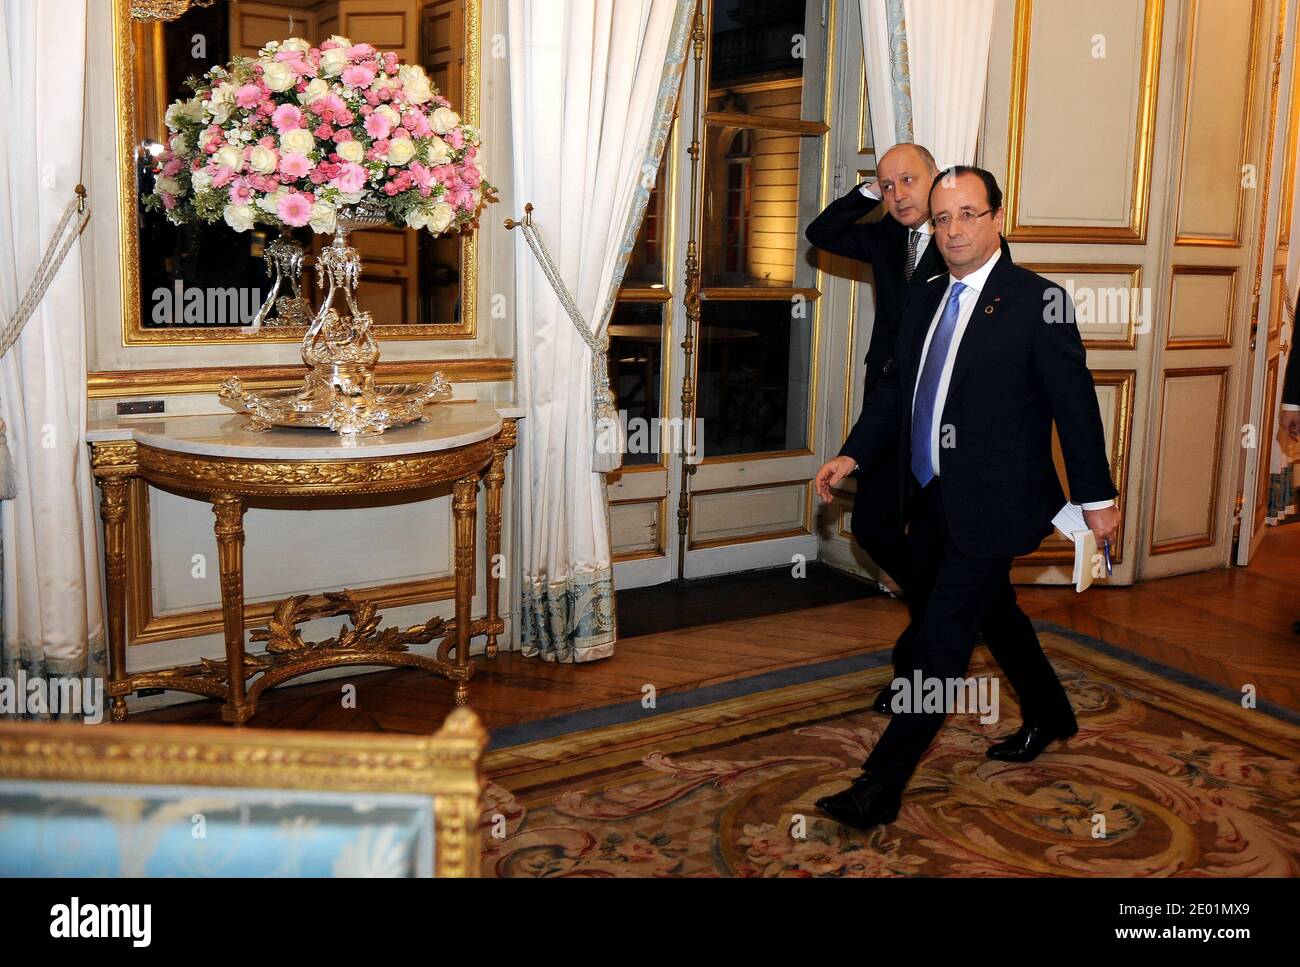 French President Francois Hollande (C) arrives alongside the French Minister of Foreign Affairs Laurent Fabius for a meeting dedicated to the situation in the Central African Republic, as part of a Summit for peace and safety in Africa at the Elysee presidential palace, in Paris, France, on December 7, 2013. Hollande on December 6 told African leaders it is time for their continent to take charge of its own security as a major summit went ahead against the sombre backdrop of the mourning for late former South African president Nelson Mandela. Photo by Mousse/ABACAPRESS.COM Stock Photo